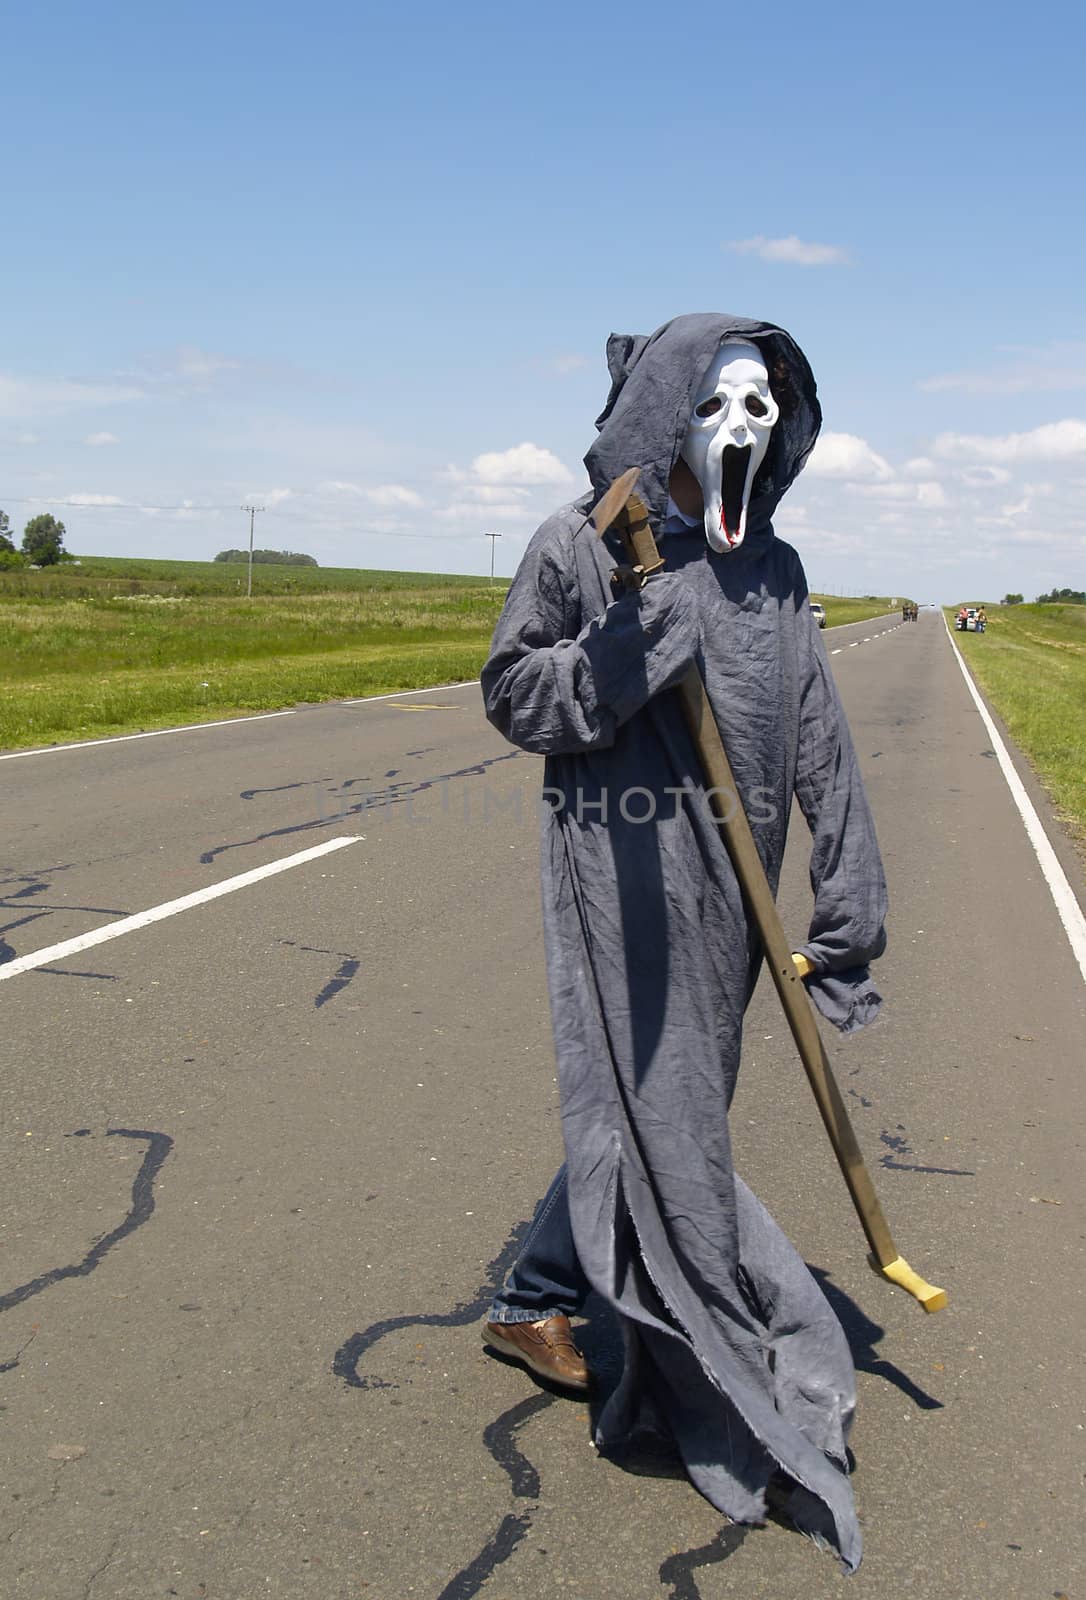 man with disguise representing the dangers in the highways.